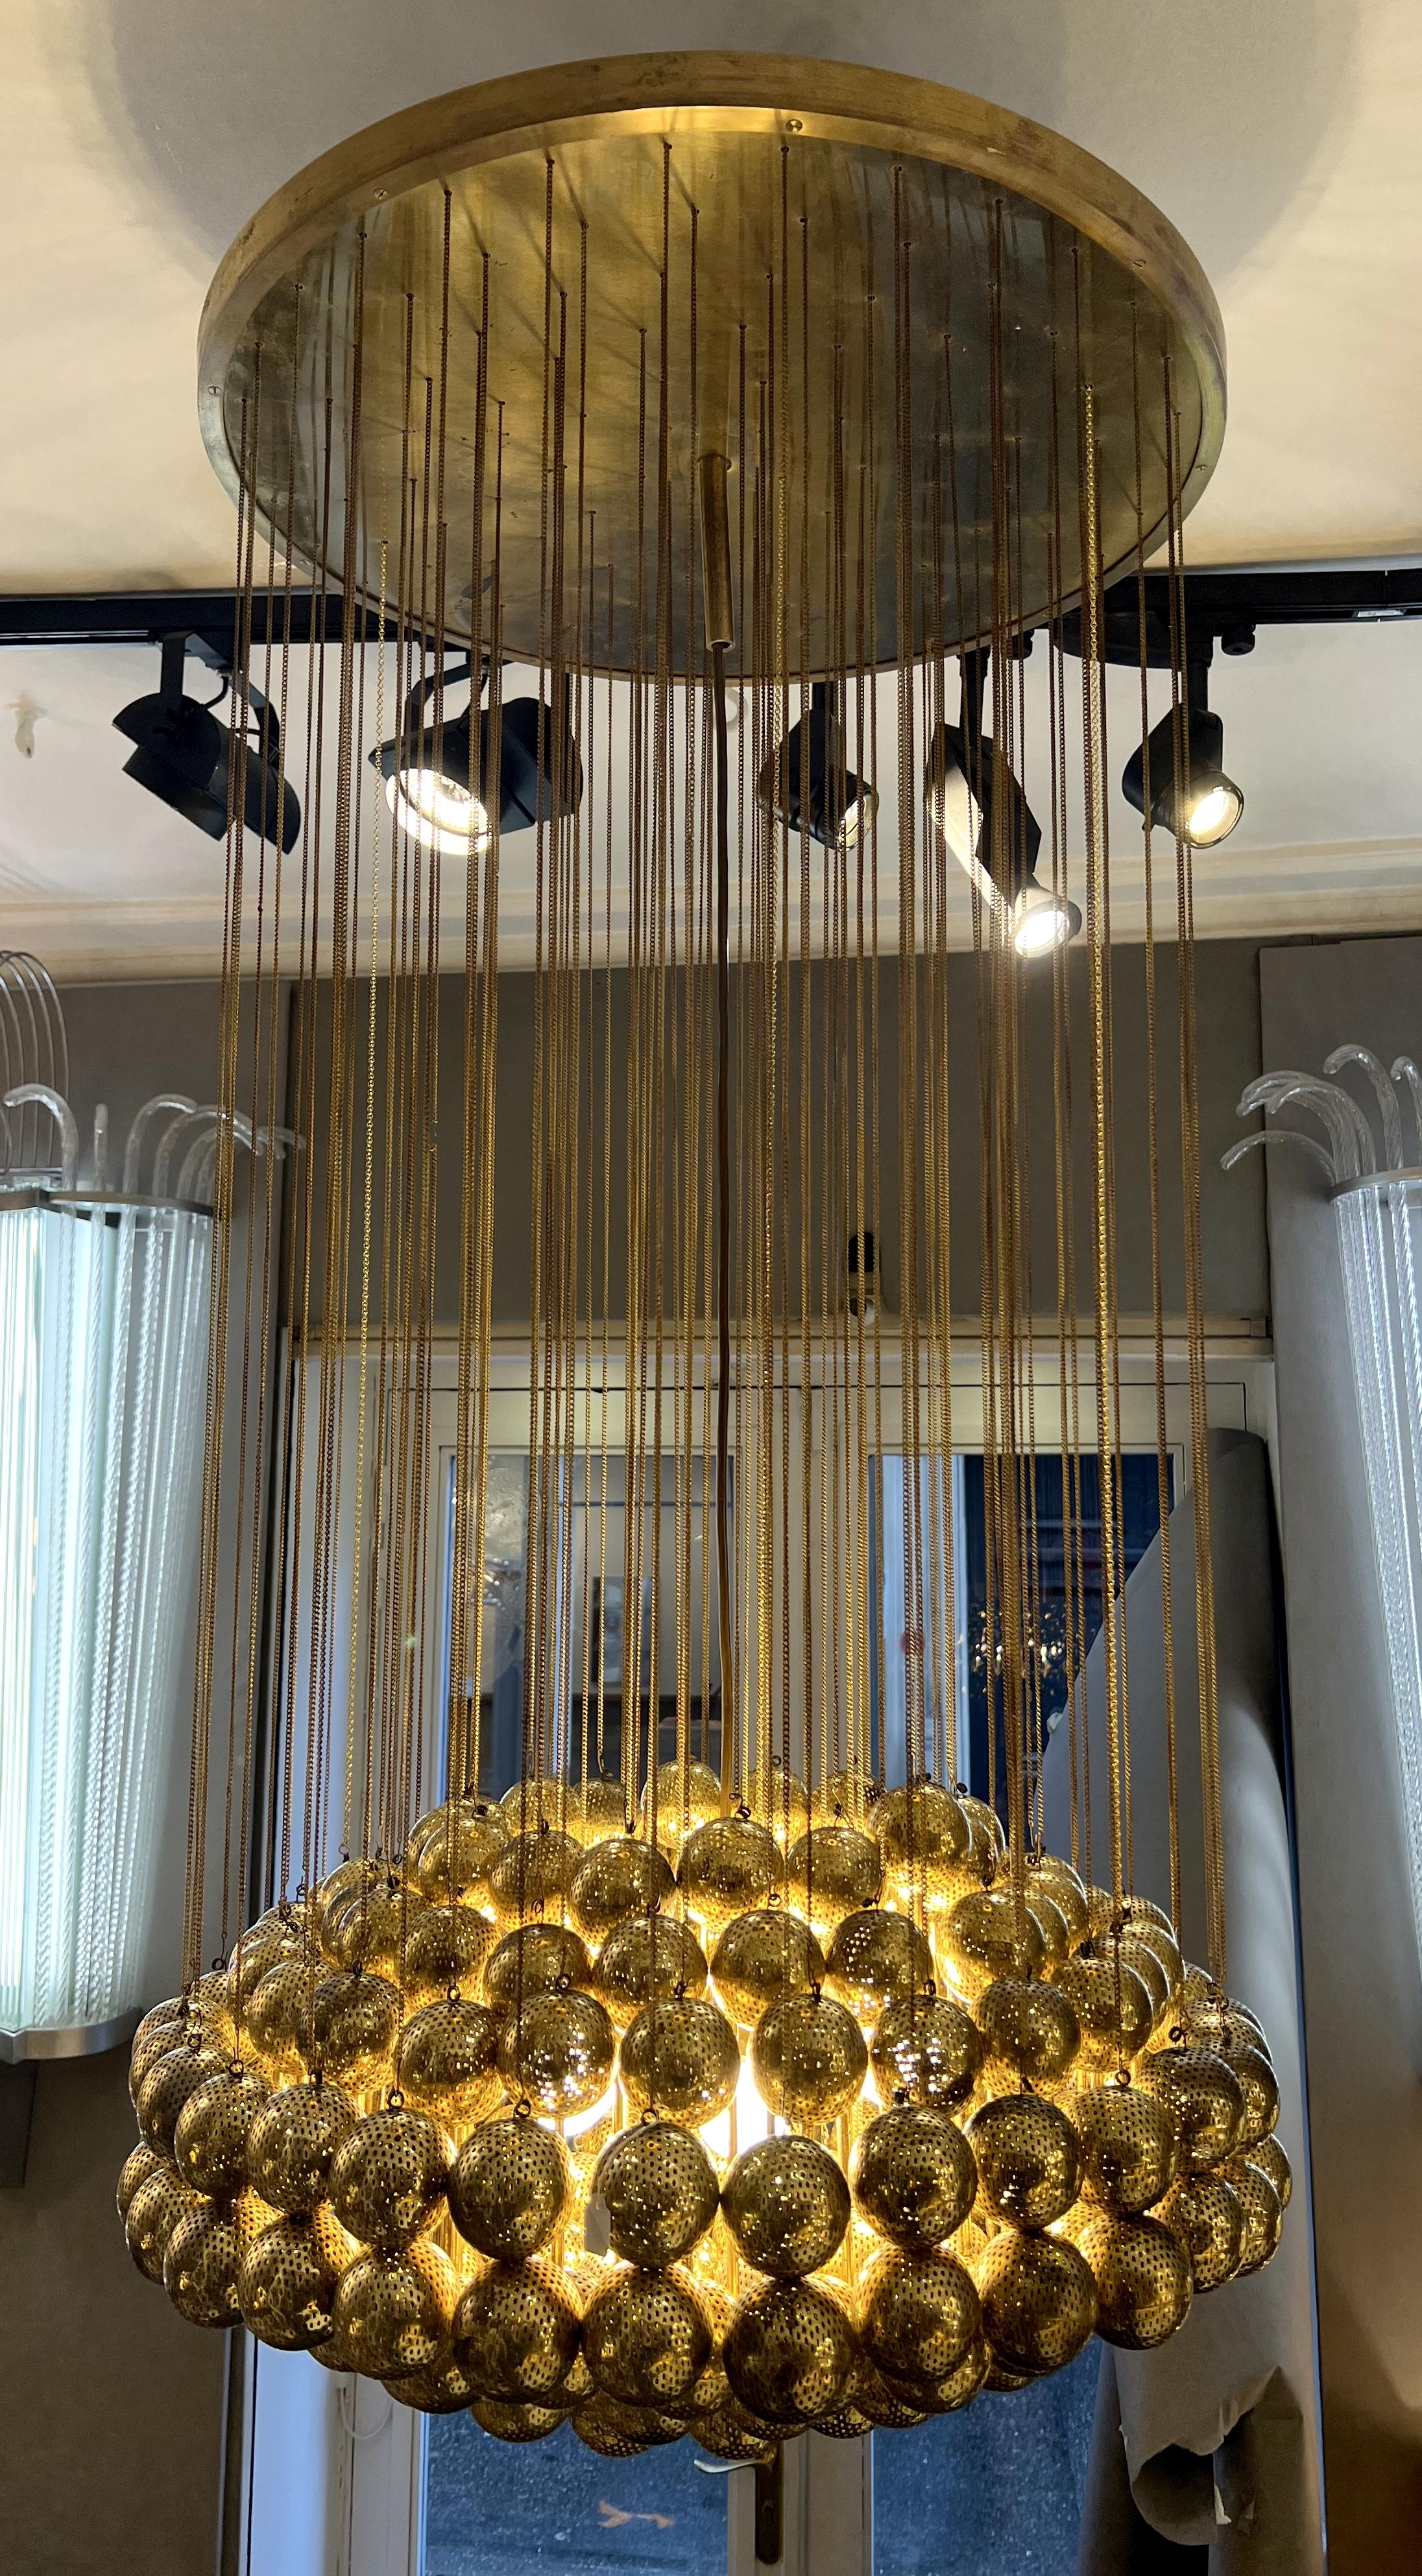 Rare suspension by Zero Quattro Milano, consisting of a multitude of perforated globes suspended from a ceiling light by chains. An electrical system bearing the Zero Quattro Milano label and supporting five bulbs is concealed high up in the center